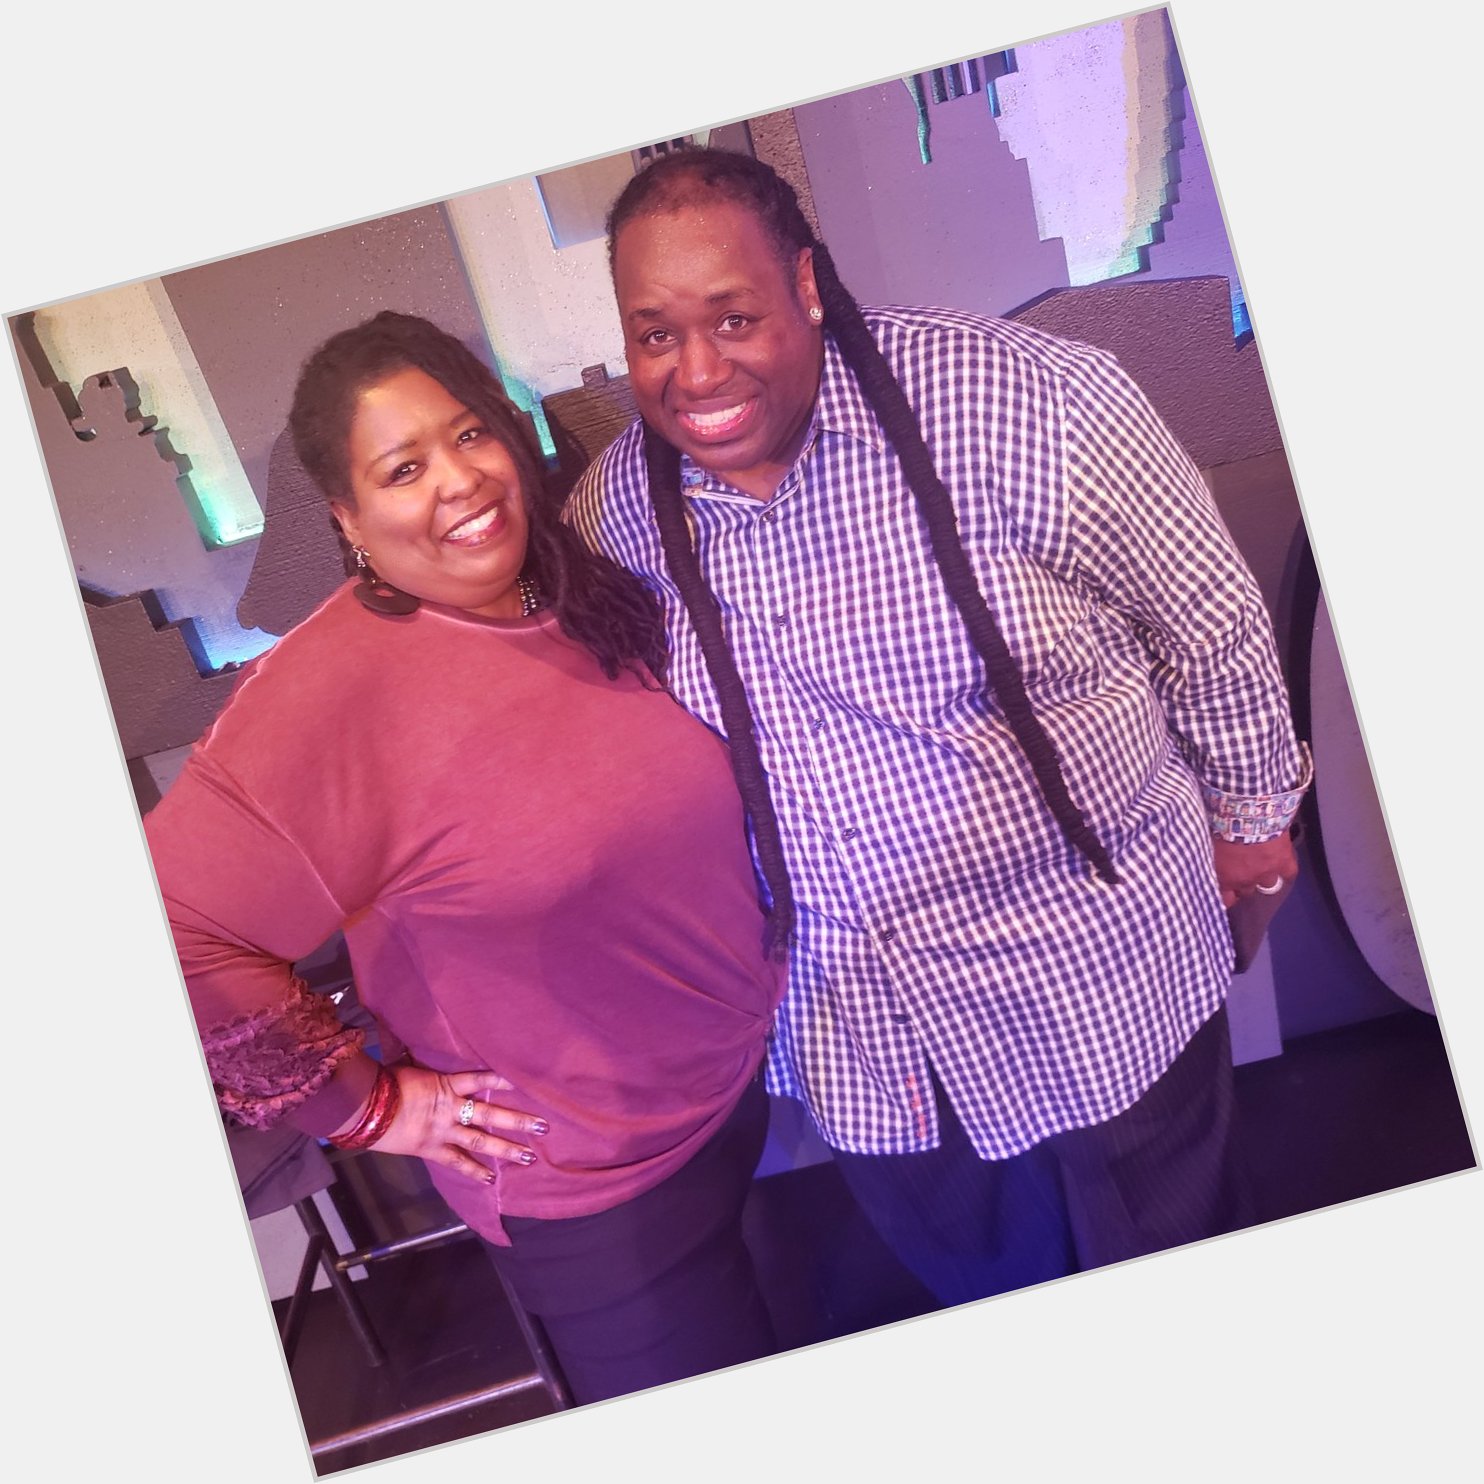  Happy Birthday Bruce Bruce you and I at the Baltimore Comedy Factory 